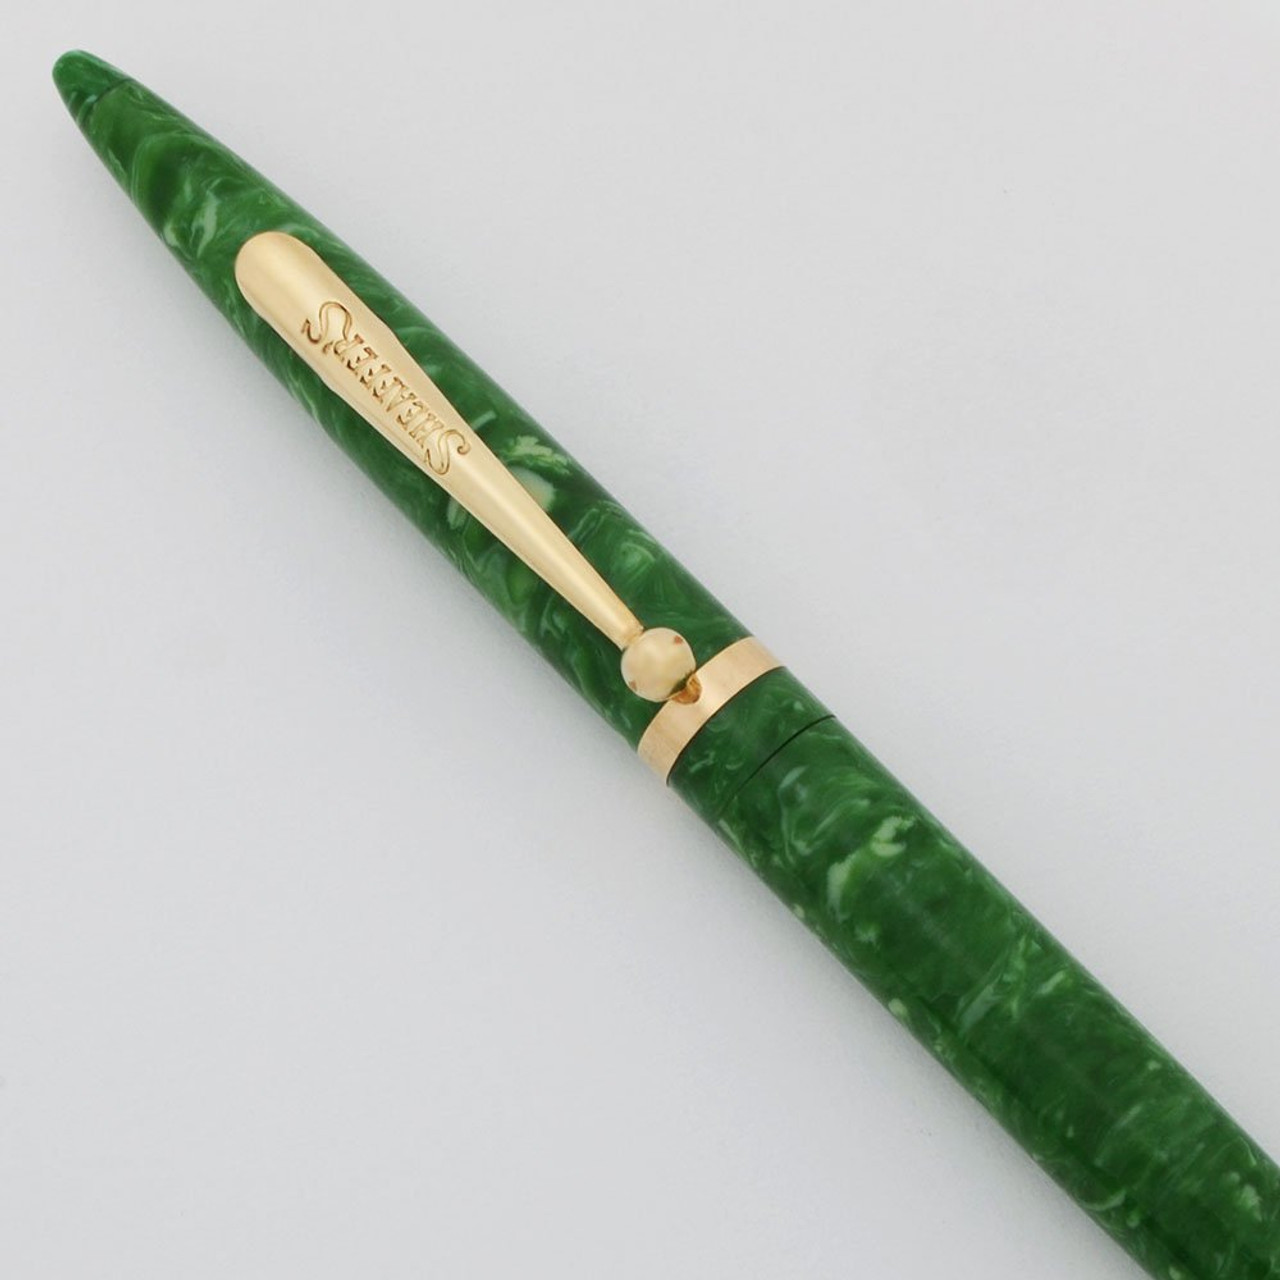 Sheaffer Balance Mechanical Pencil (1930s) - Early Version w Long Humped Clip, Oversize (1930s), Jade Green, 1.1mm Leads (Excellent +, Works Well)